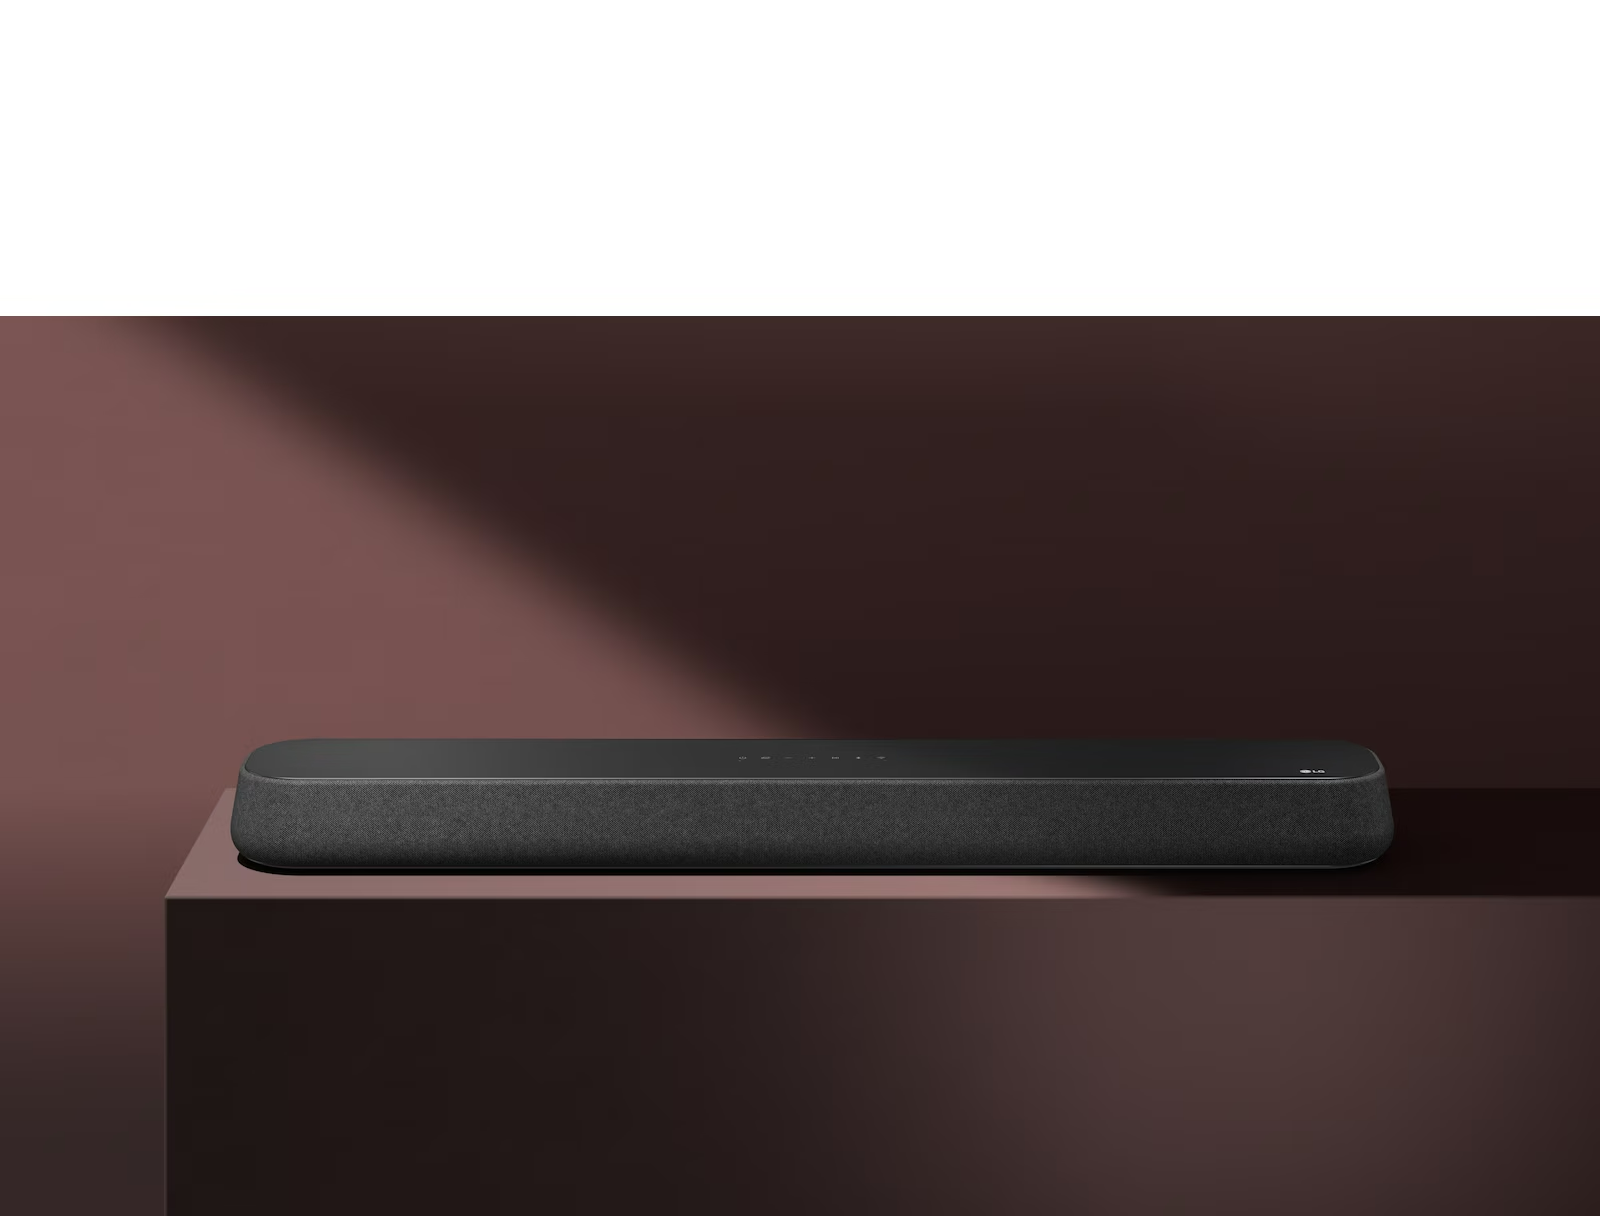 The LG Soundbar  SE6S is placed on the red box in front of red background. A black shadow is covering the upper right half of the picture.